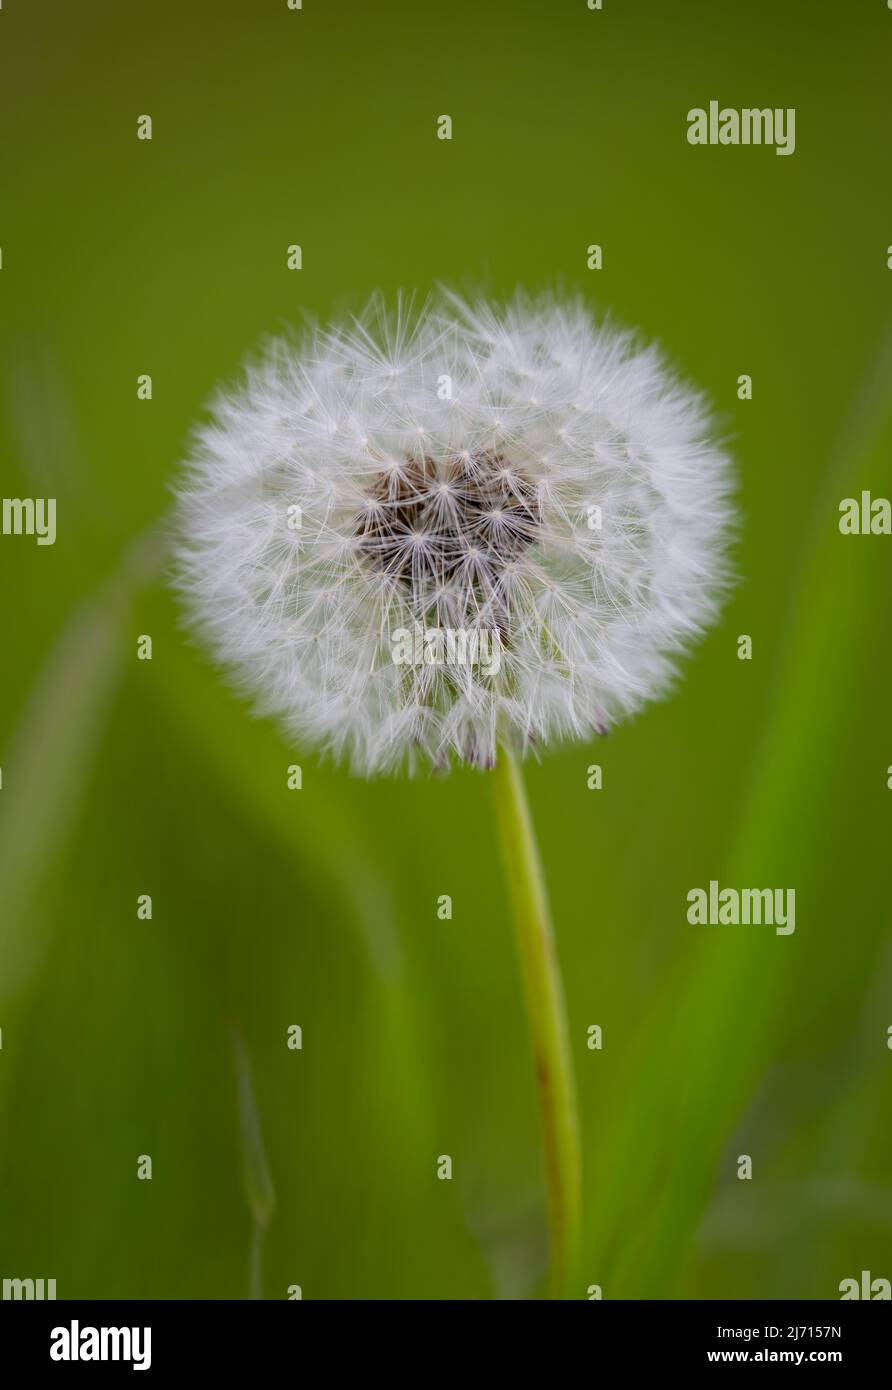 Seed head of a Common Dandelion (Taraxacum officinale), photographed against a blurred green background Stock Photo